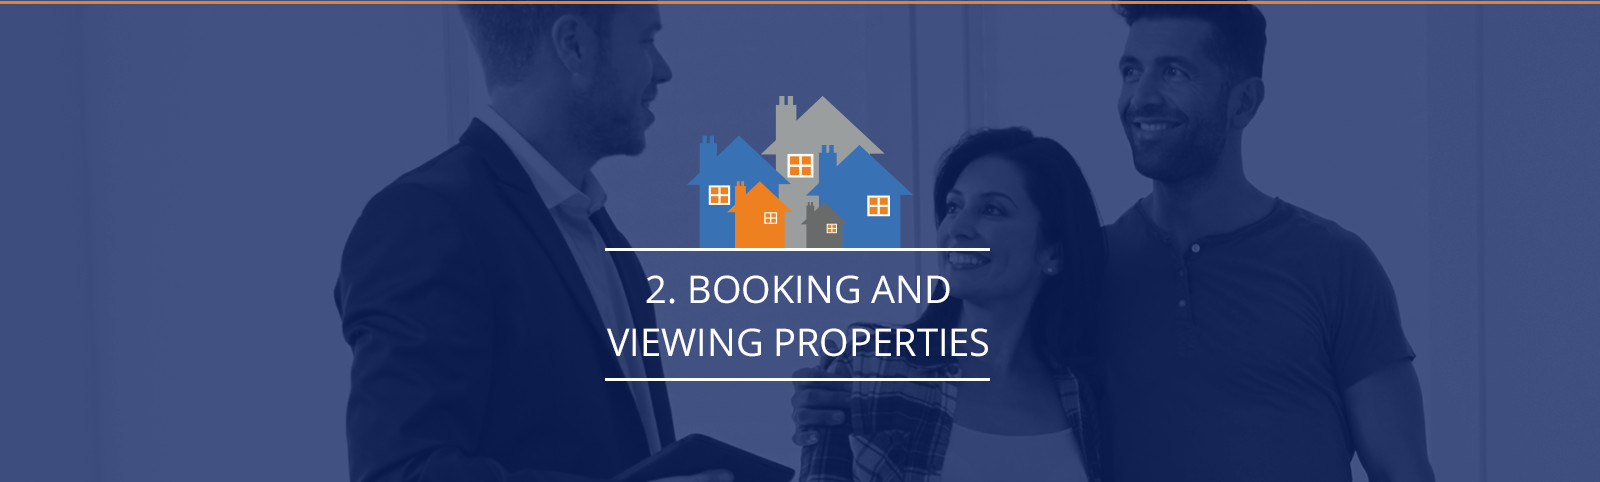 Booking and viewing properties